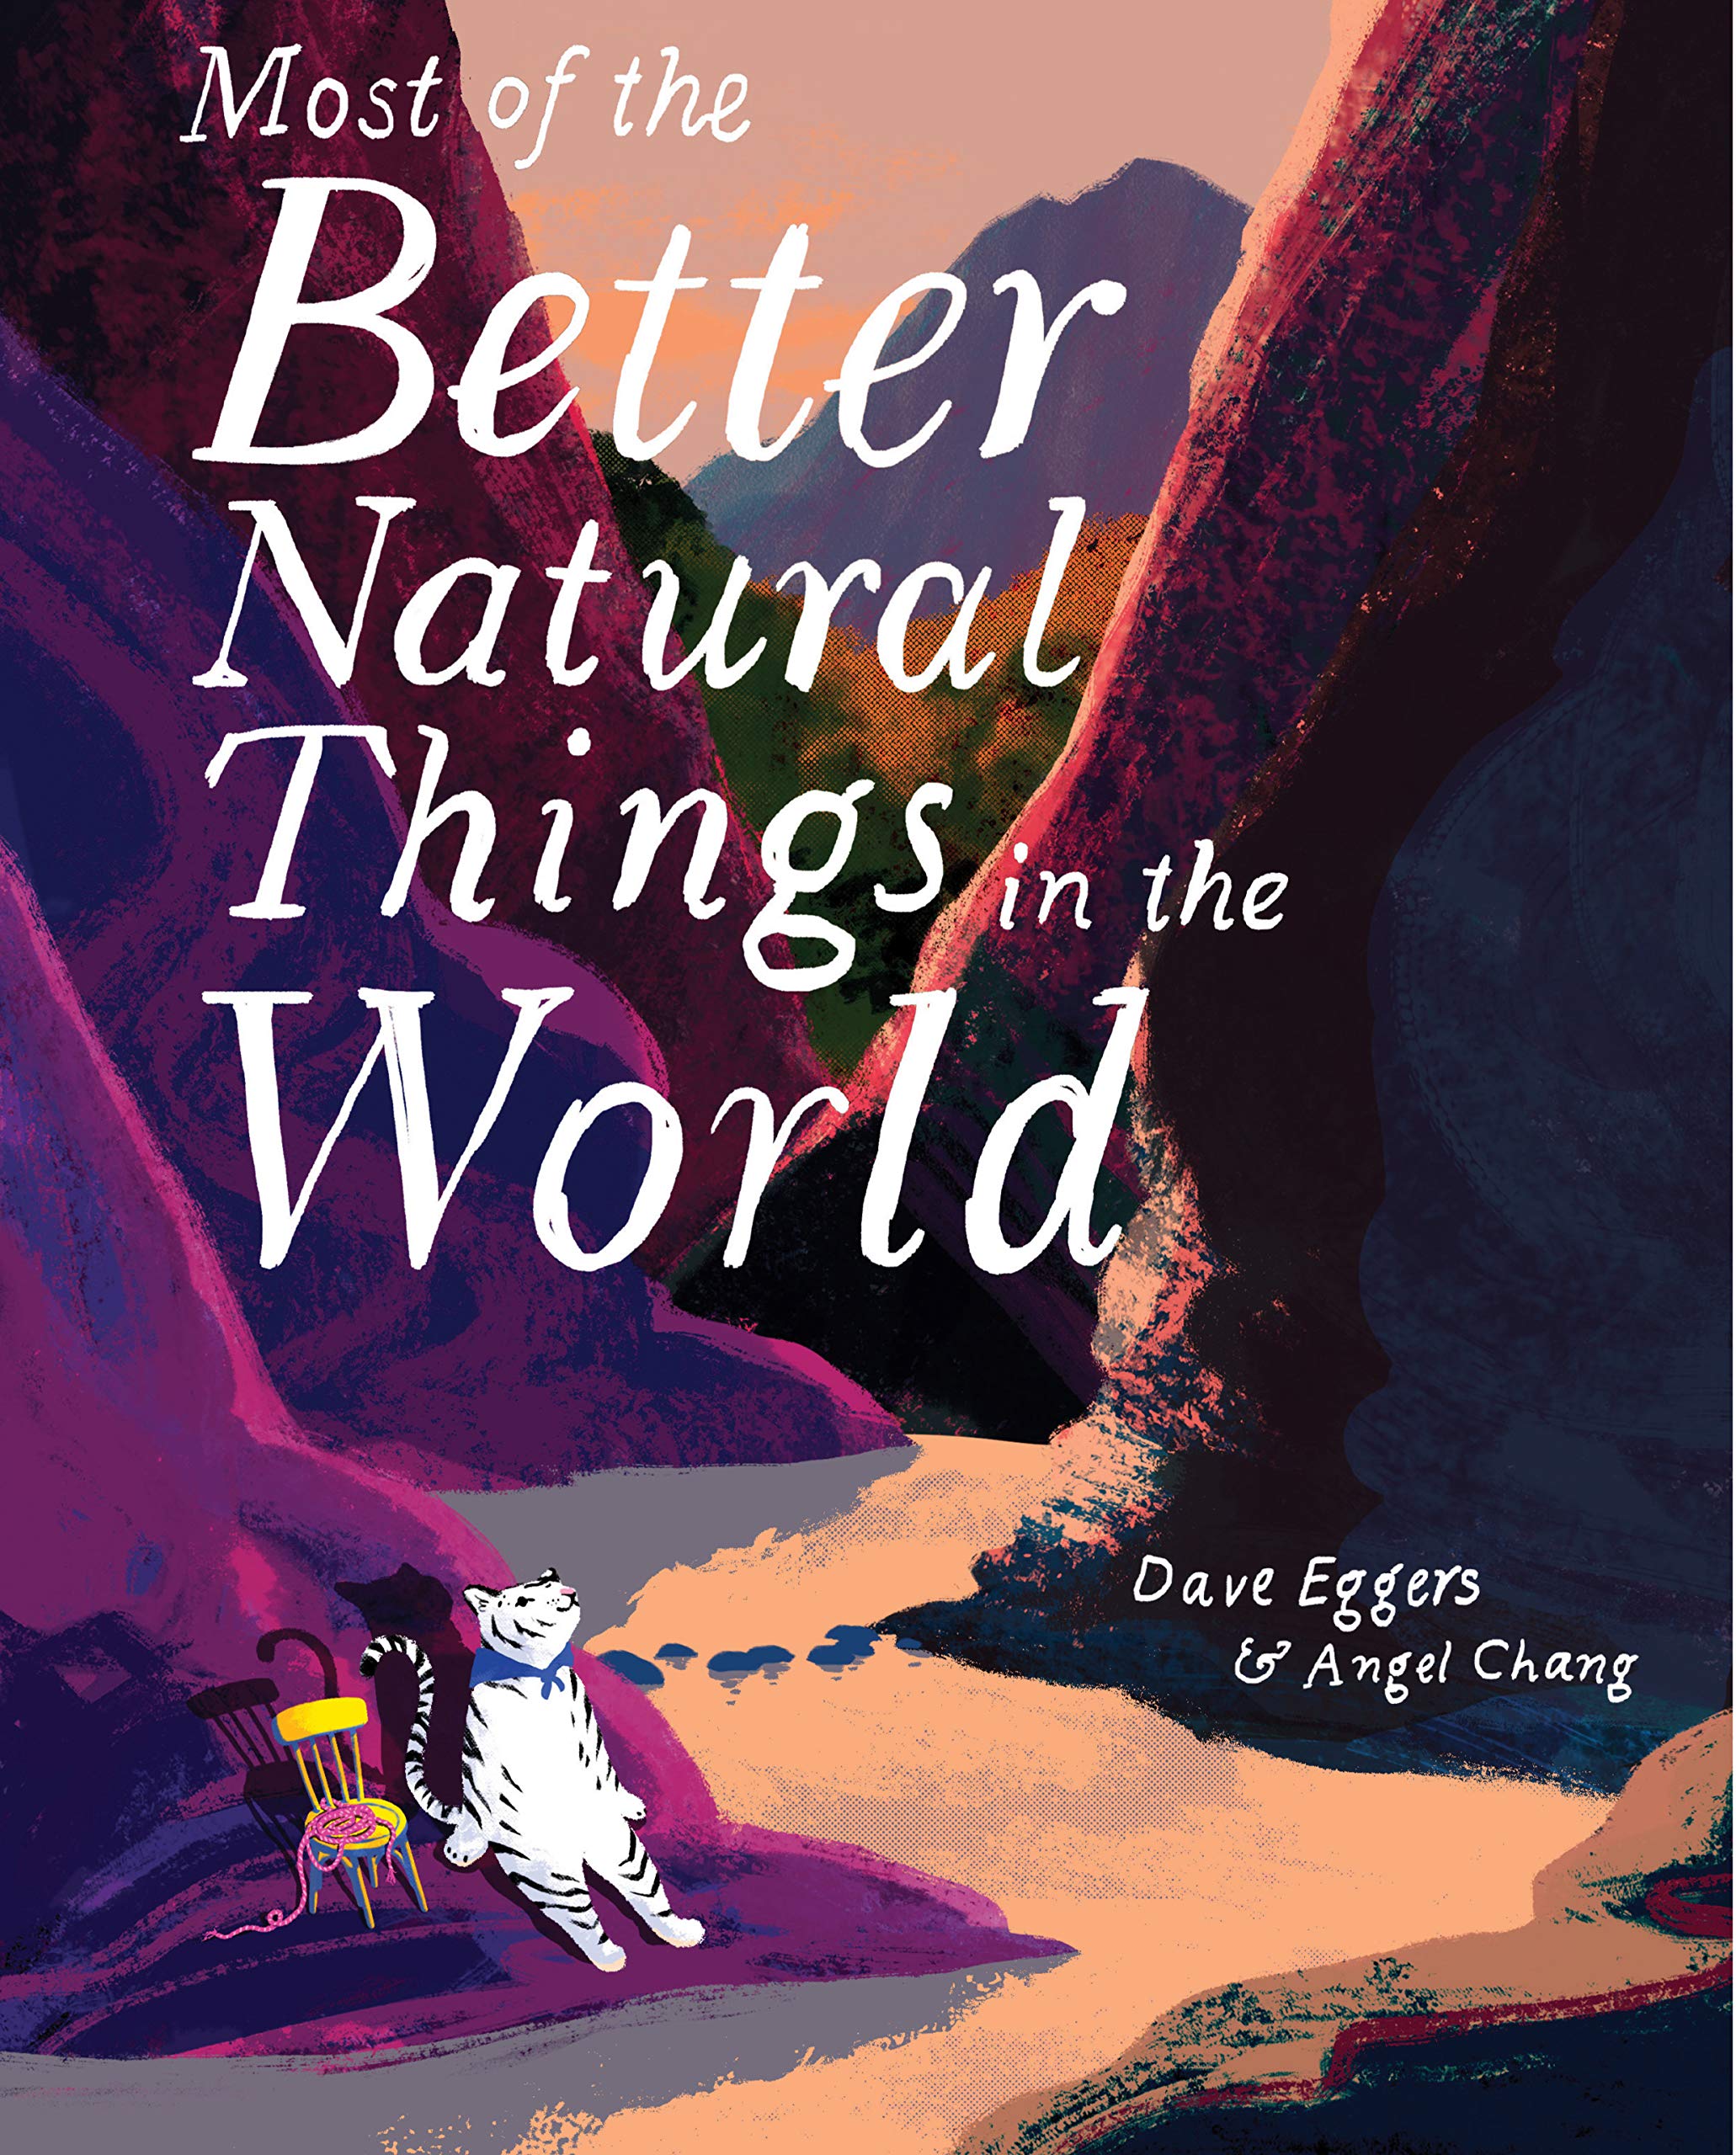 Most of the Better Natural Things in the World: (Juvenile Fiction, Nature Book for Kids, Wordless Picture Book)